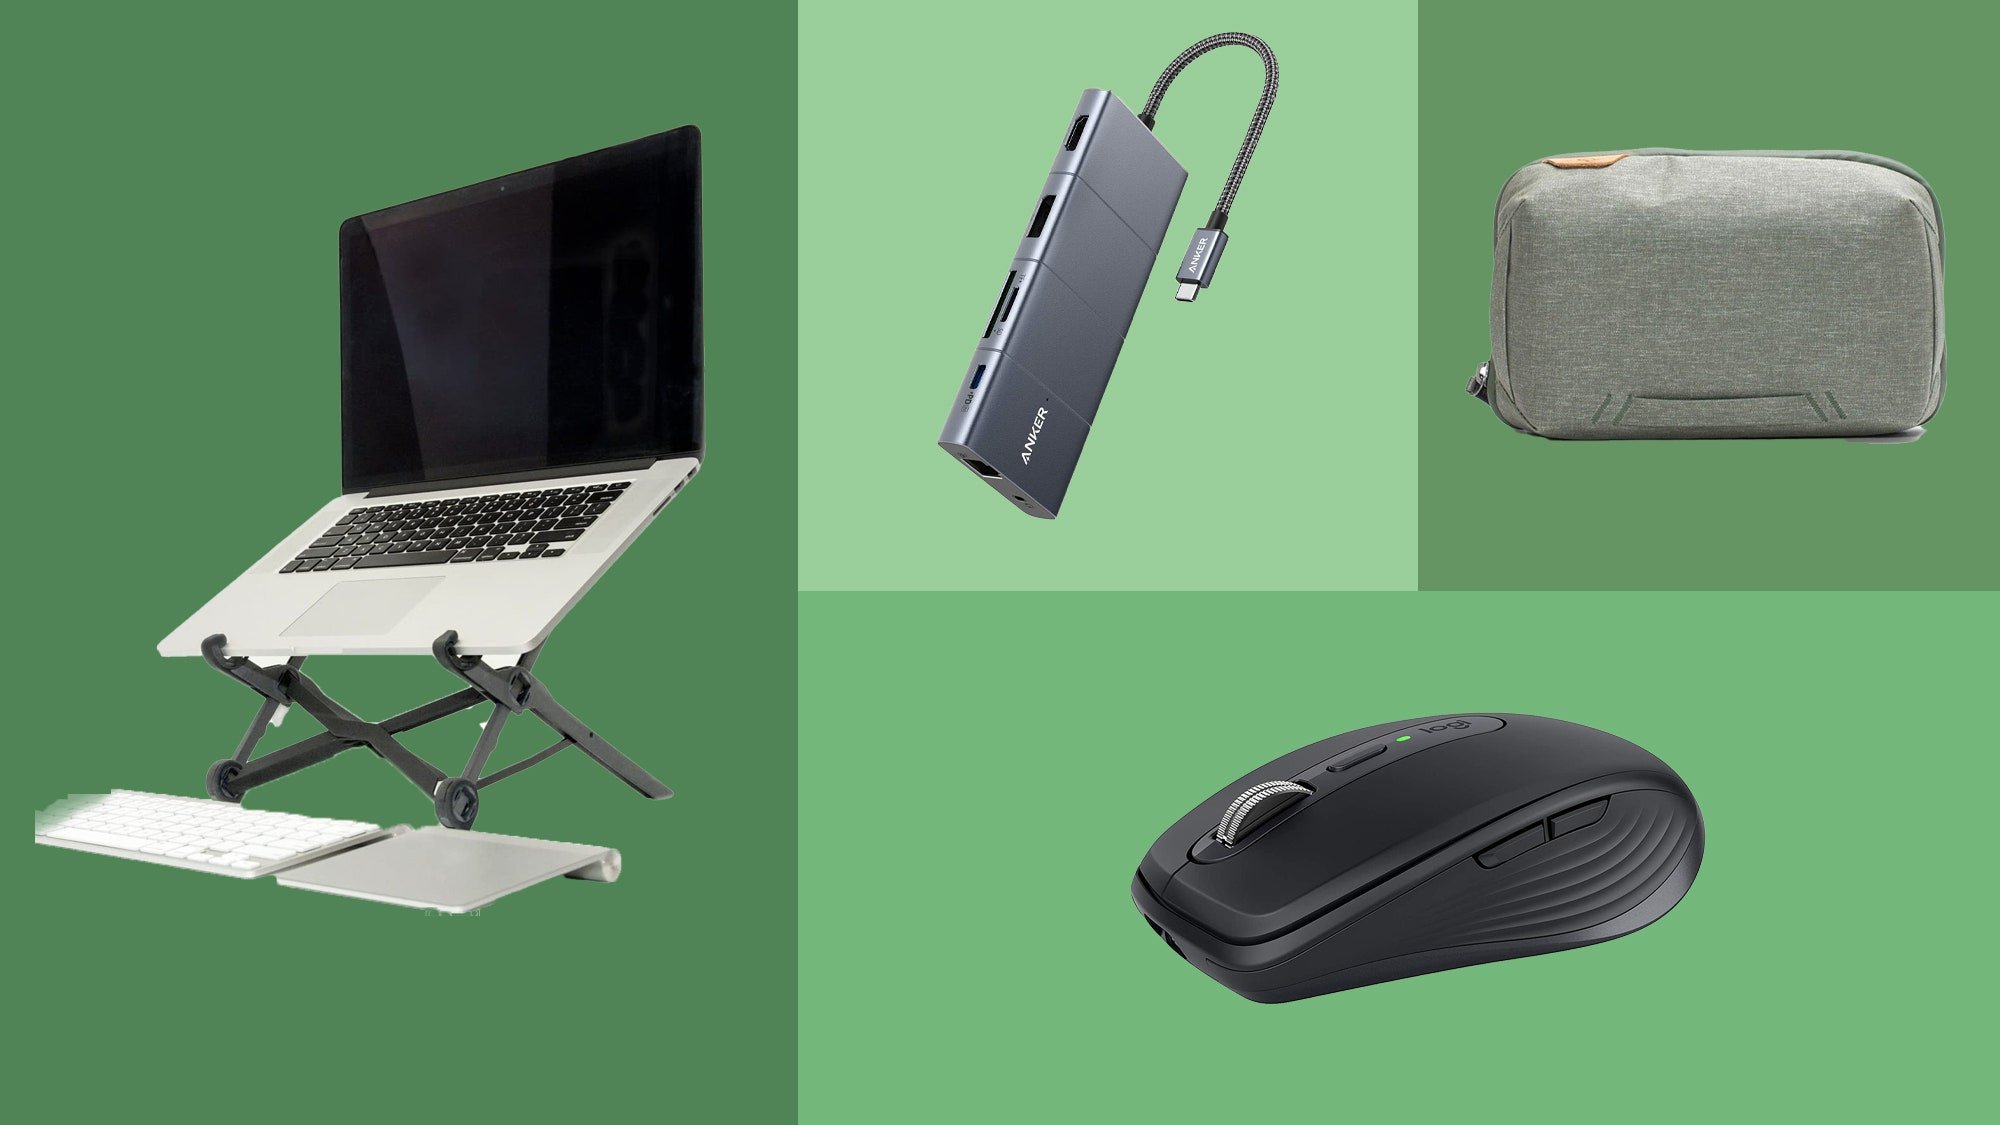 The Best Work From Home Gear to Travel With, from Wi-Fi Hotspots to Collapsible Laptop Stands